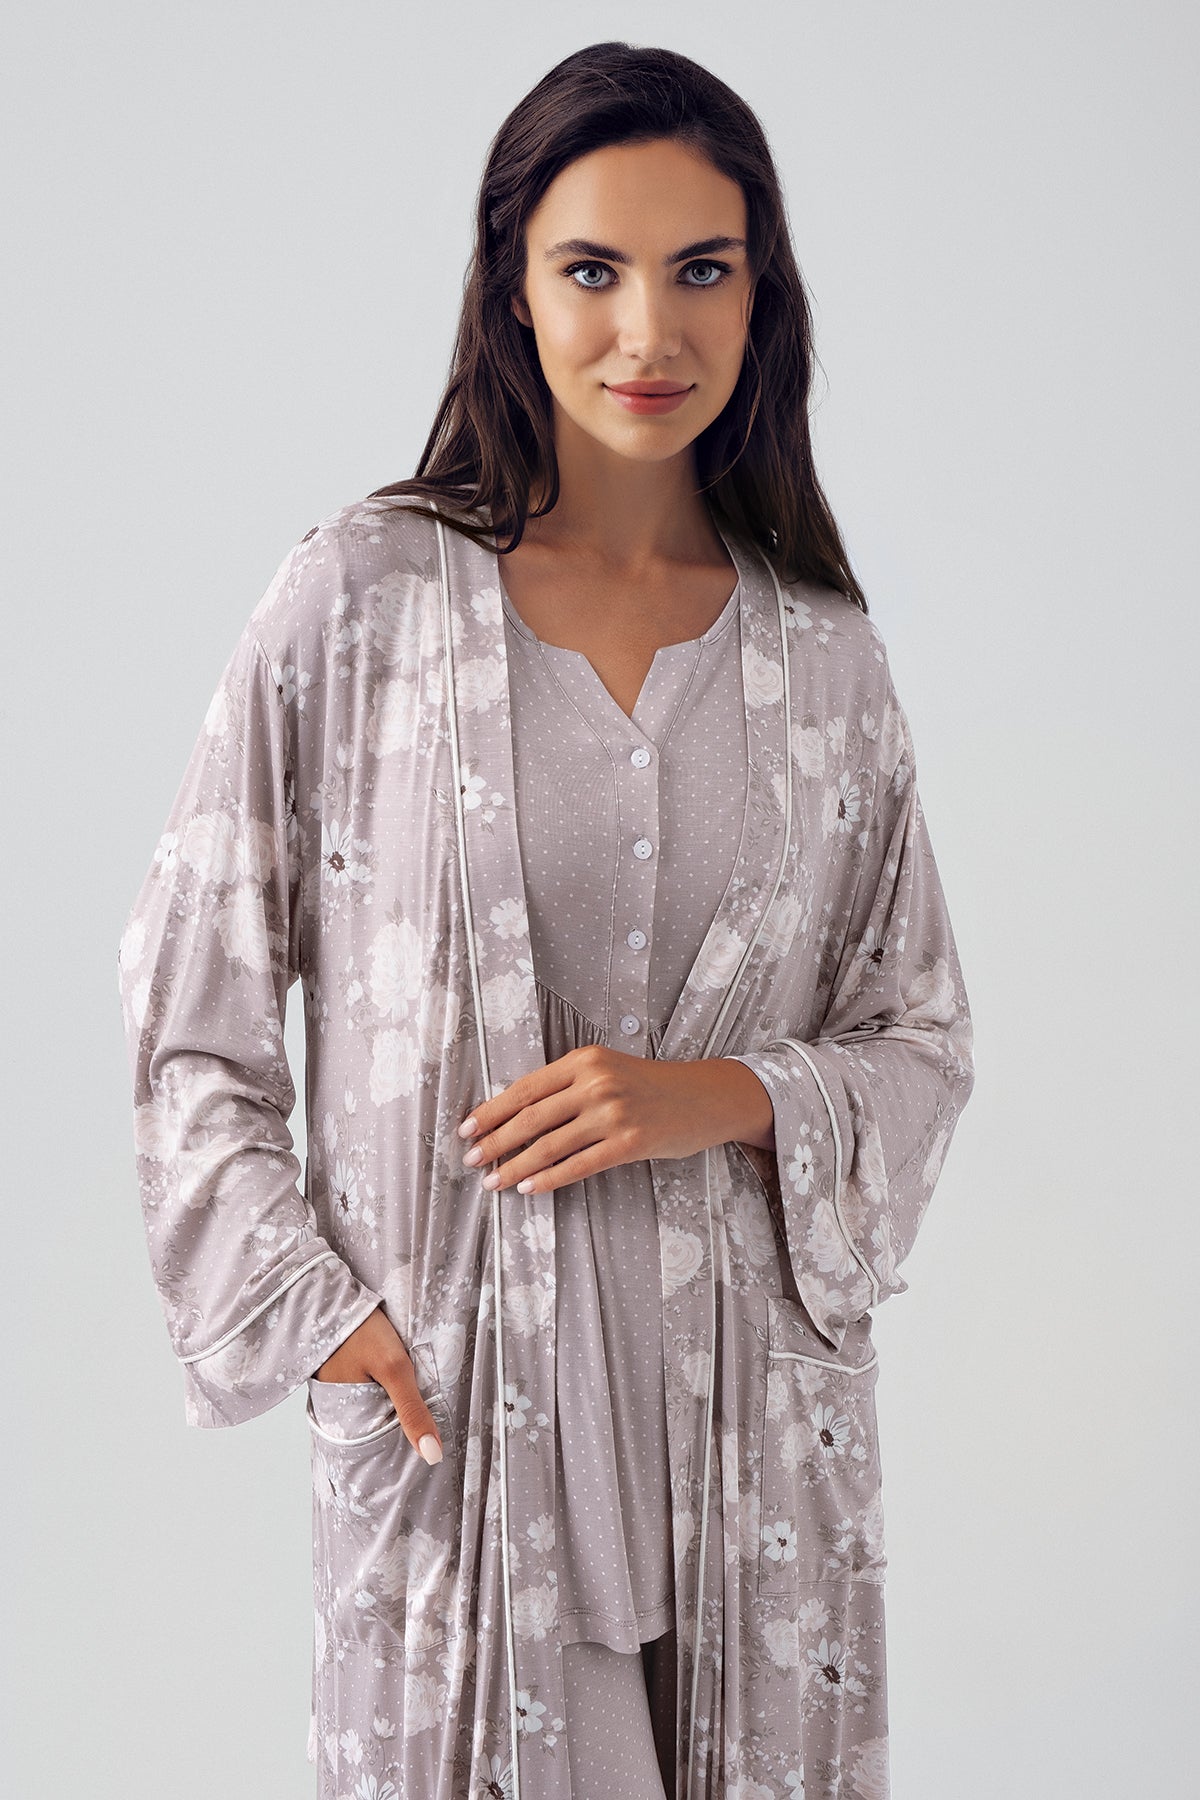 Shopymommy 15304 Polka Dot 3-Pieces Maternity & Nursing Pajamas With Flower Patterned Robe Coffee